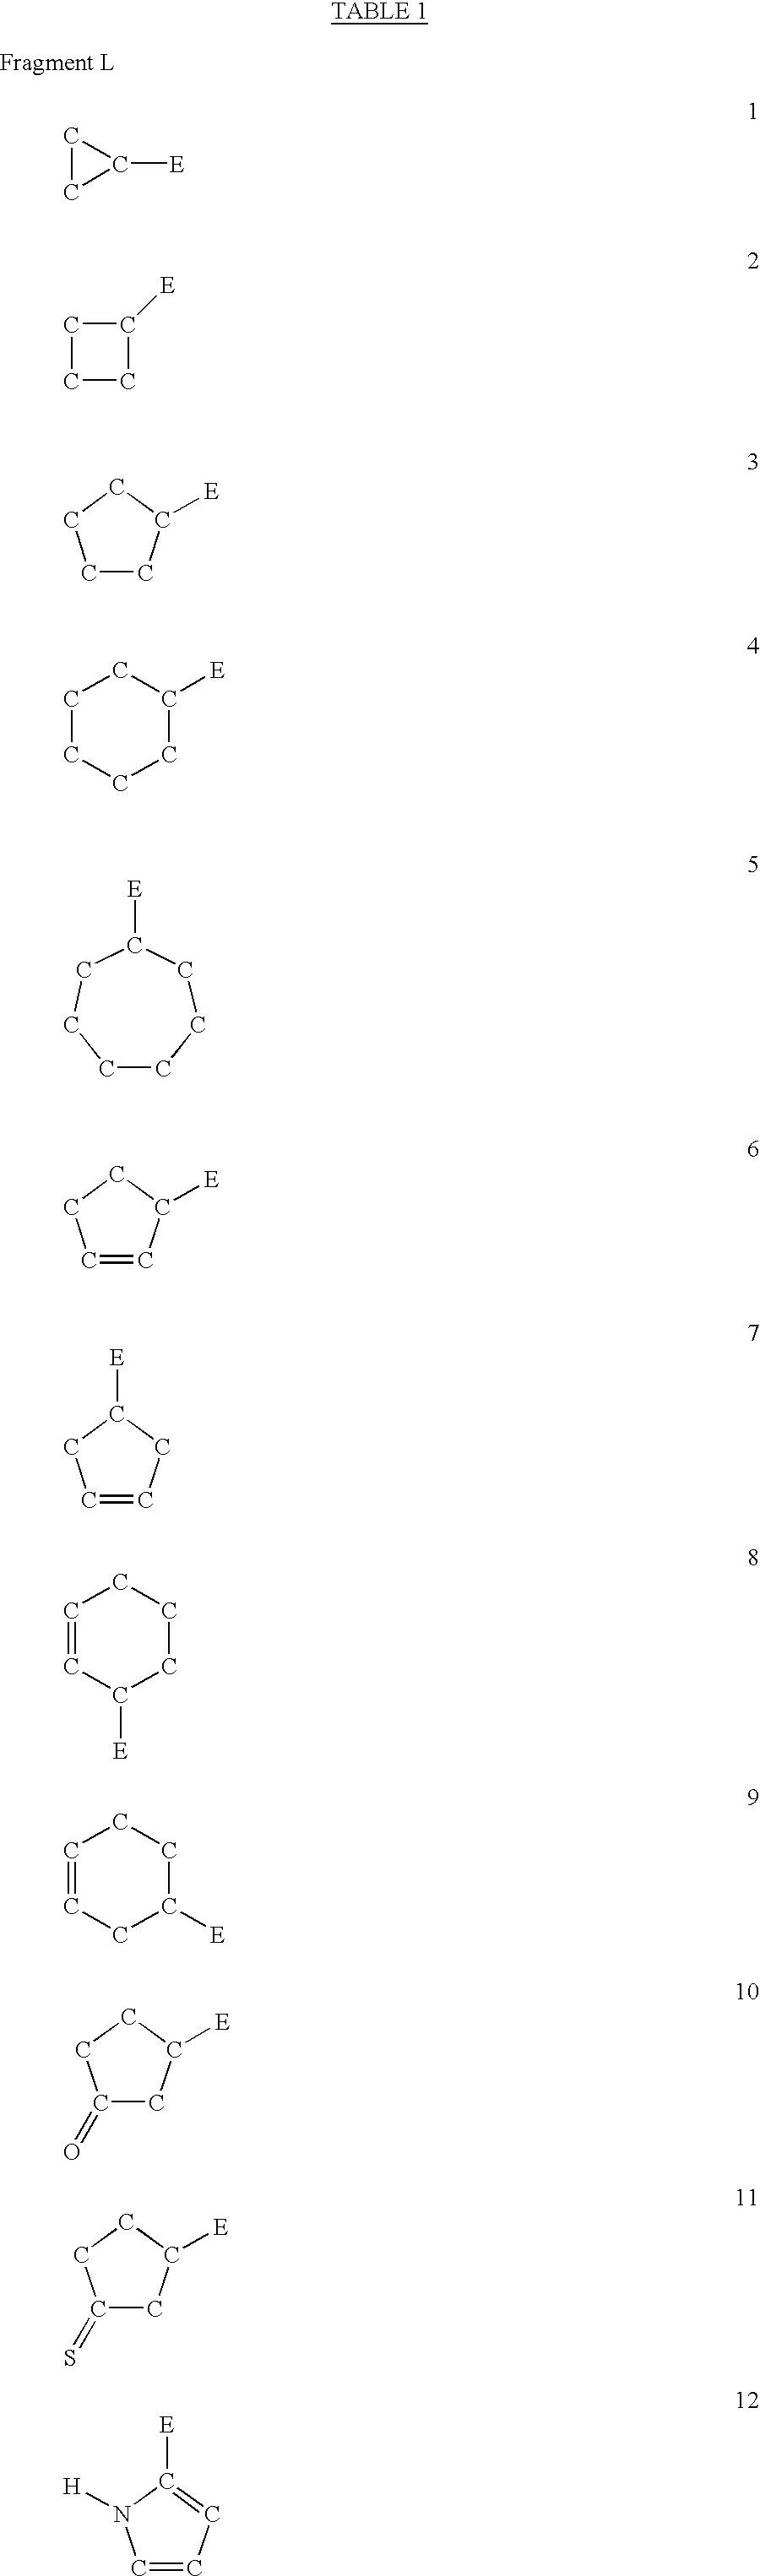 Compounds useful in the complement, coagulat and kallikrein pathways and method for their preparation